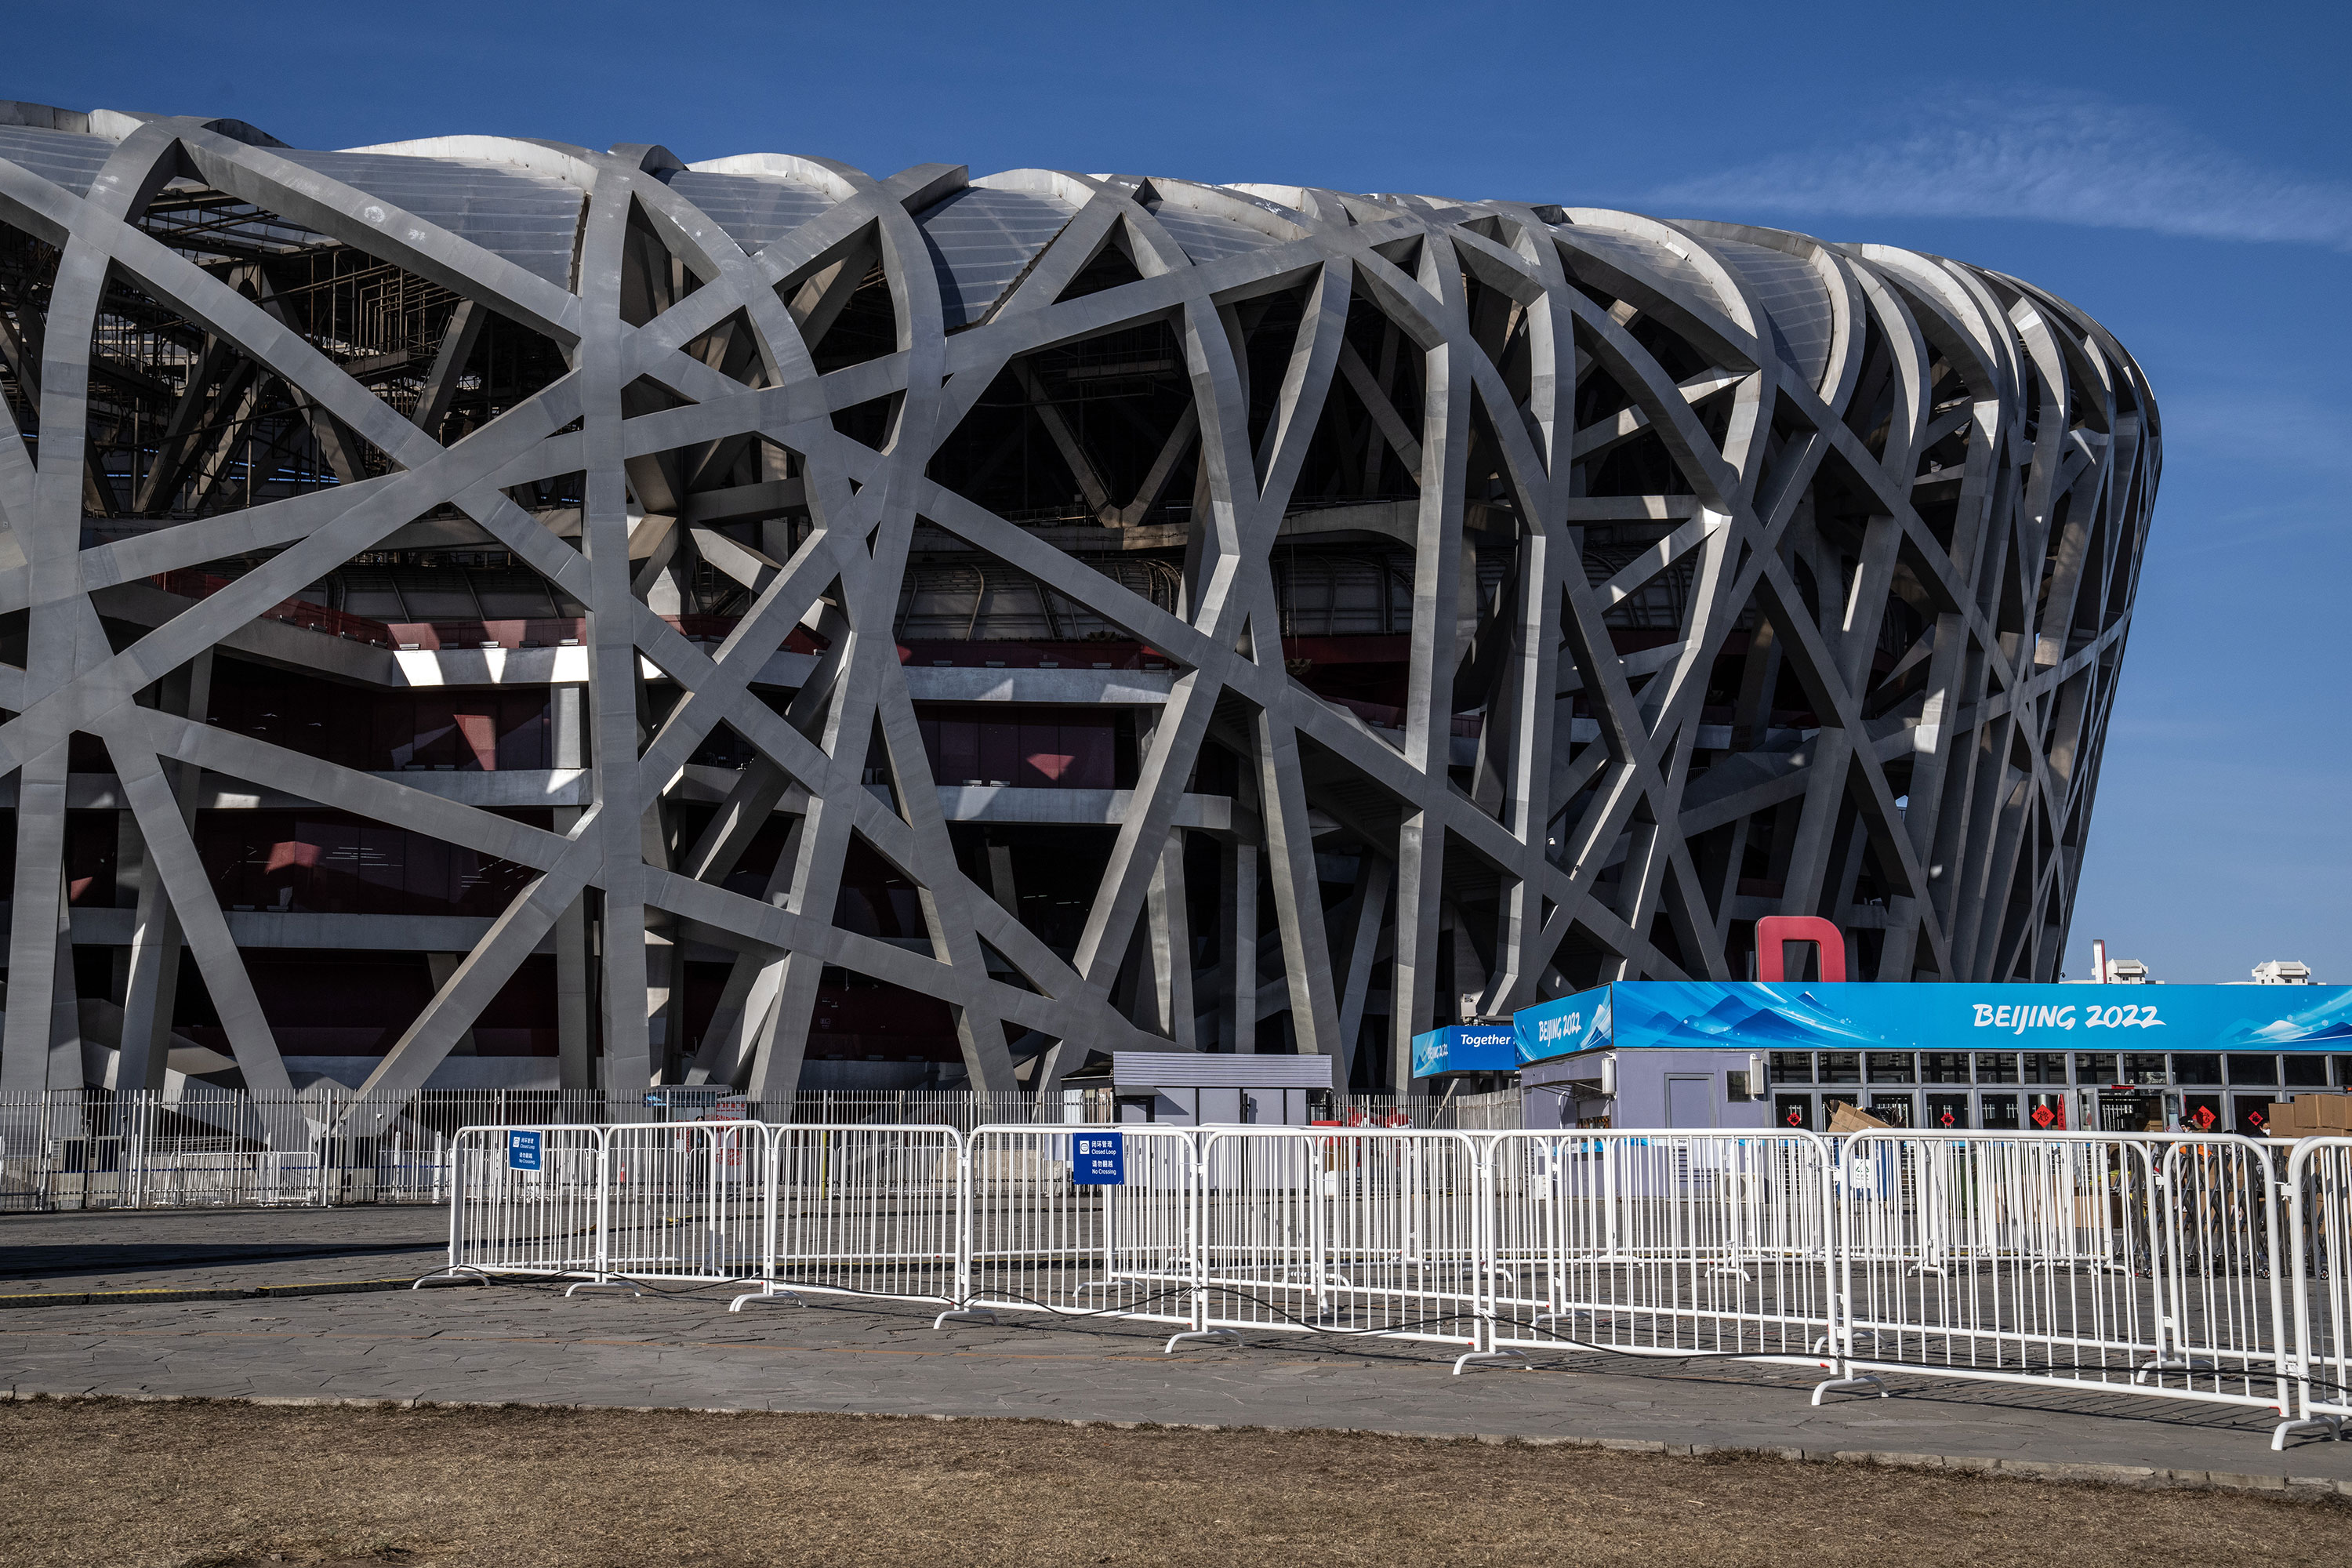 Fencing dividing the closed loop area from the open area is pictured at Beijing National Stadium on February 3.